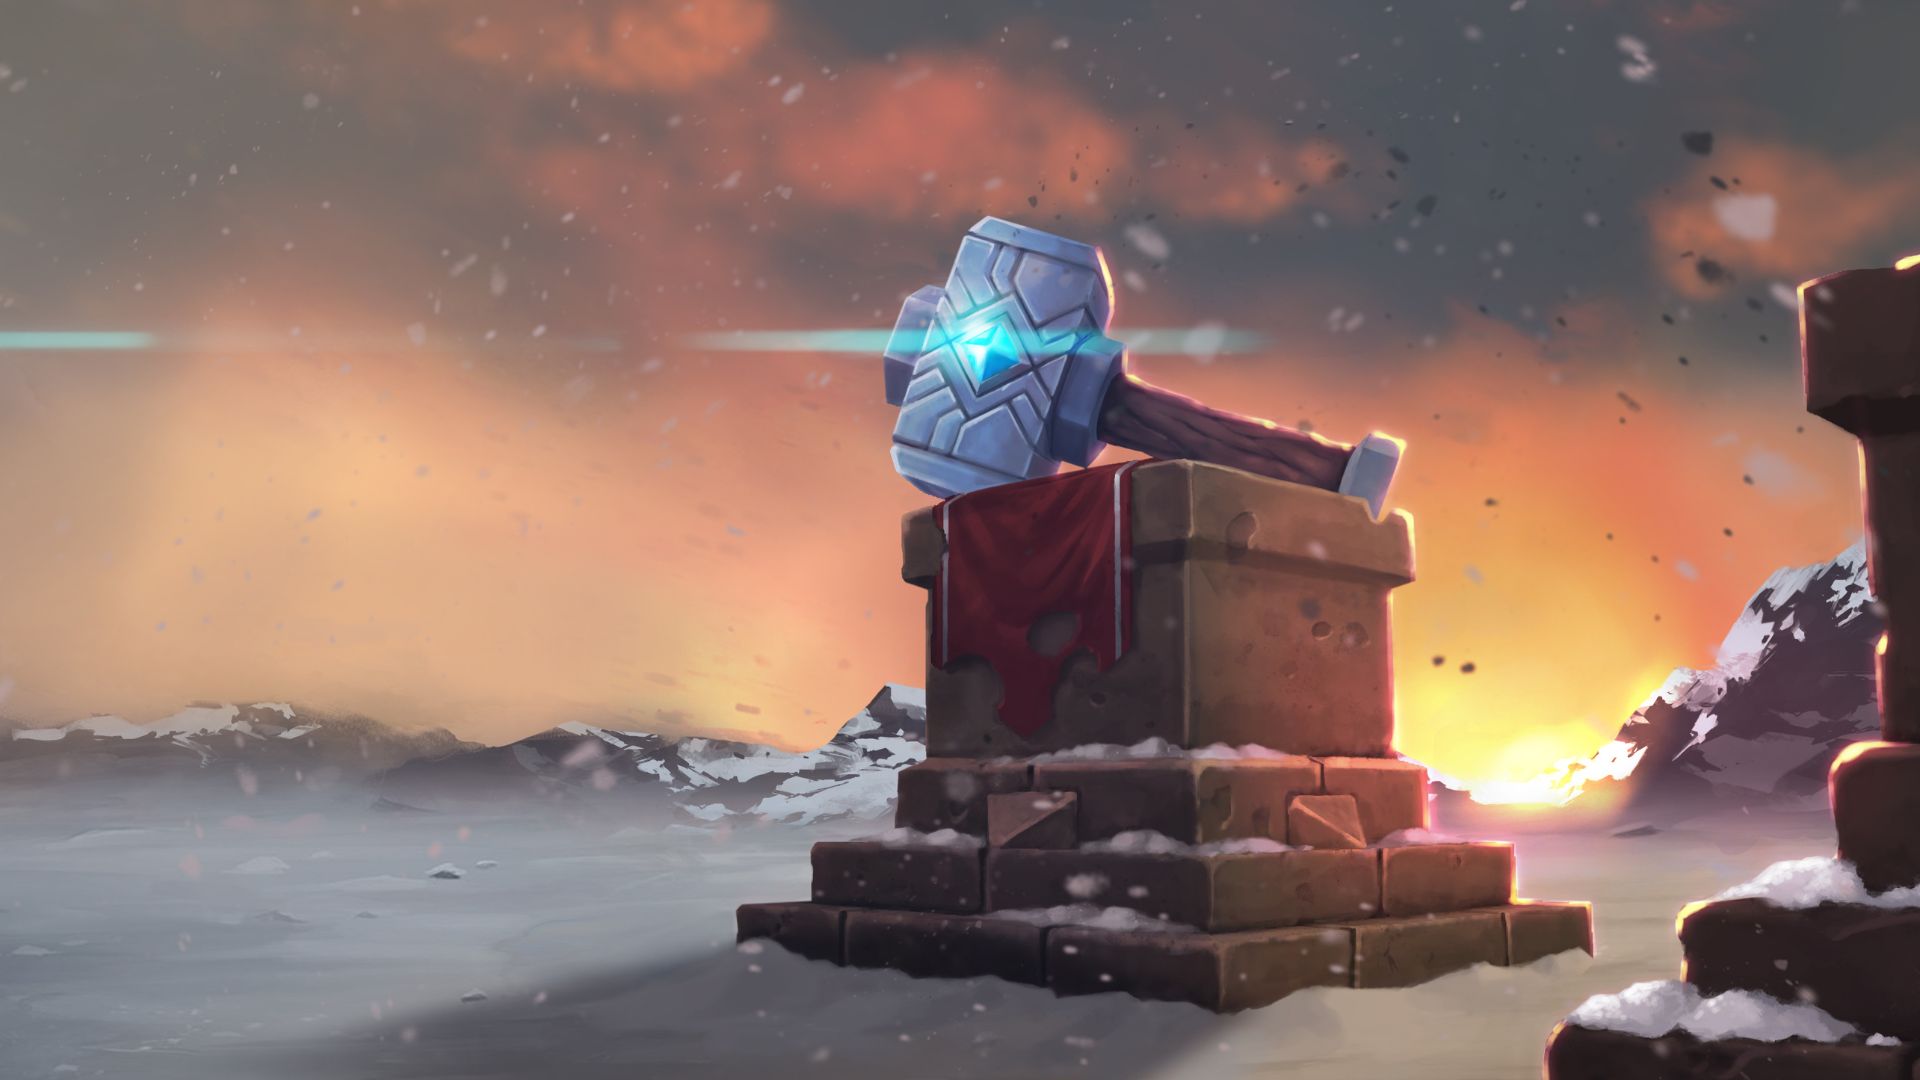 Best history games: Northguard. Image shows a hammer on a pedestal in the snow.